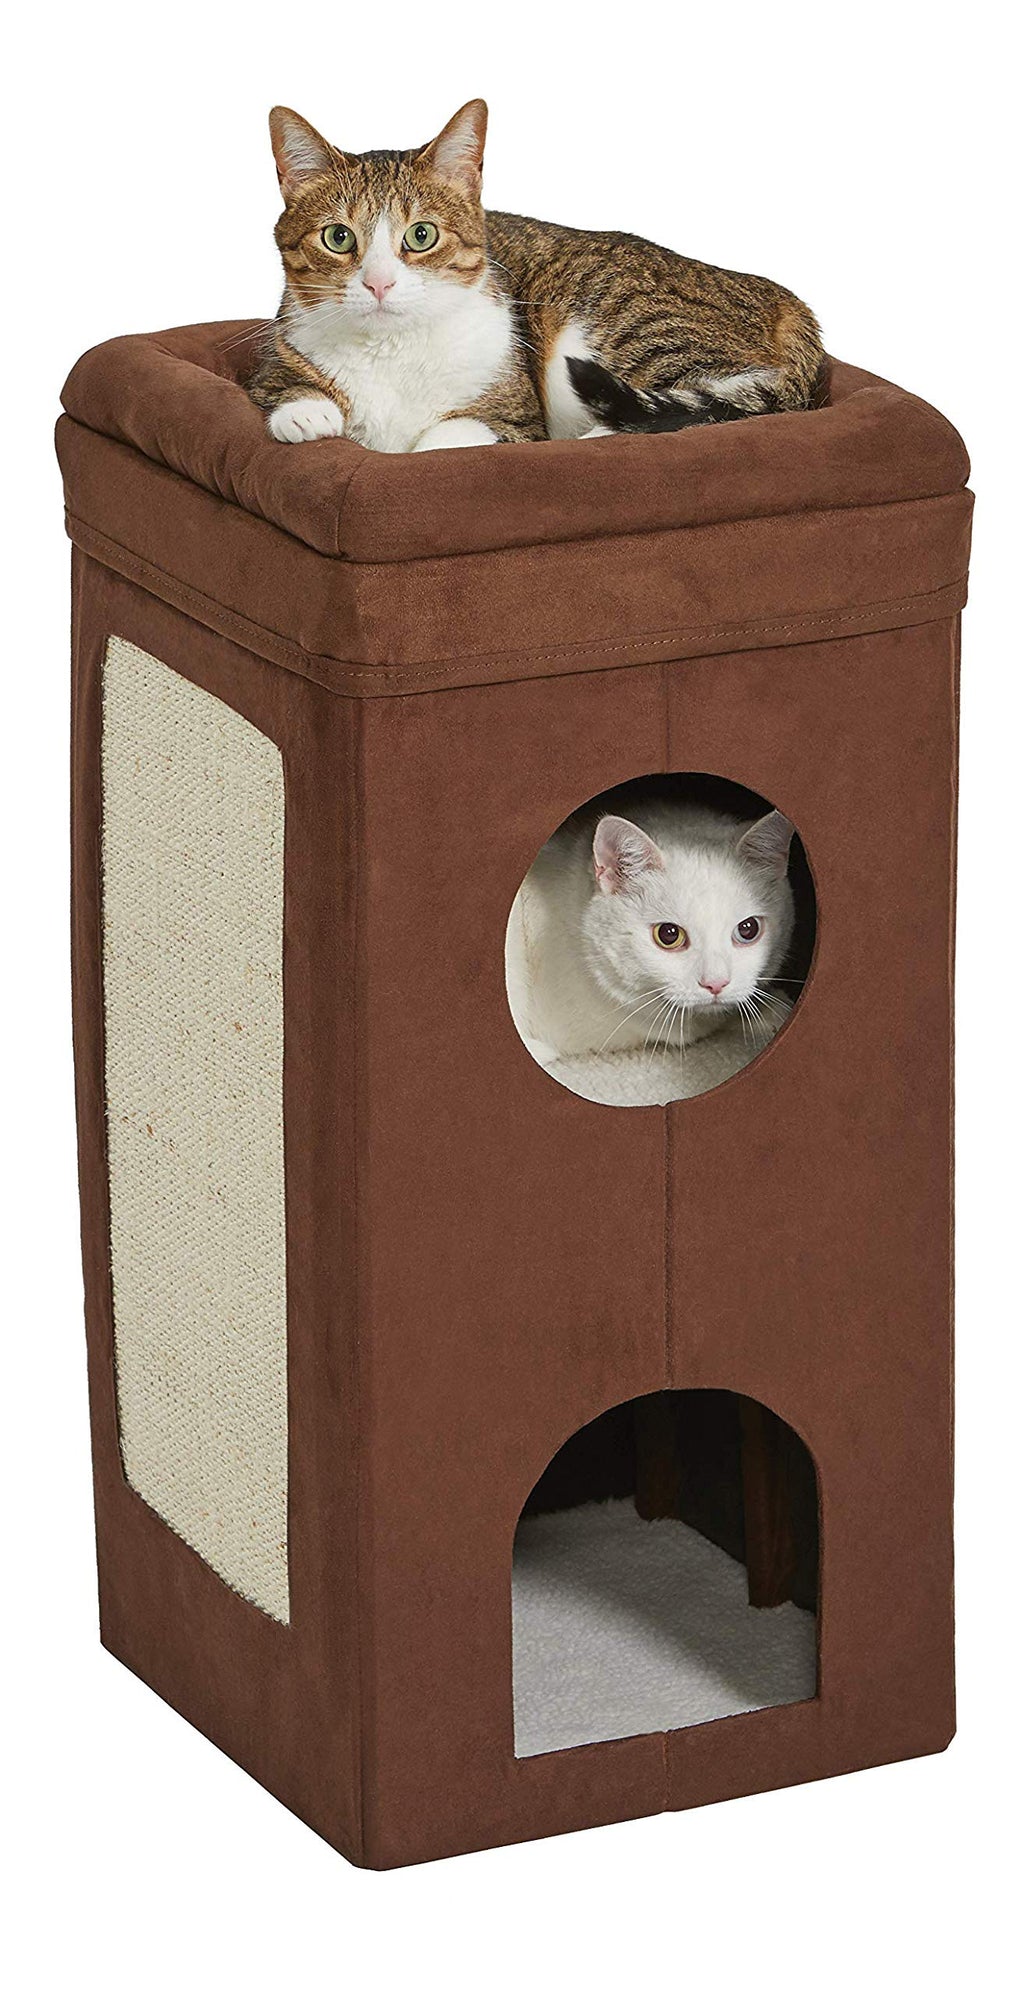 Midwest Curious Condo Cube Condo Cat Furniture - Brown - 16.5" X 16.5" 16.5" Inches  